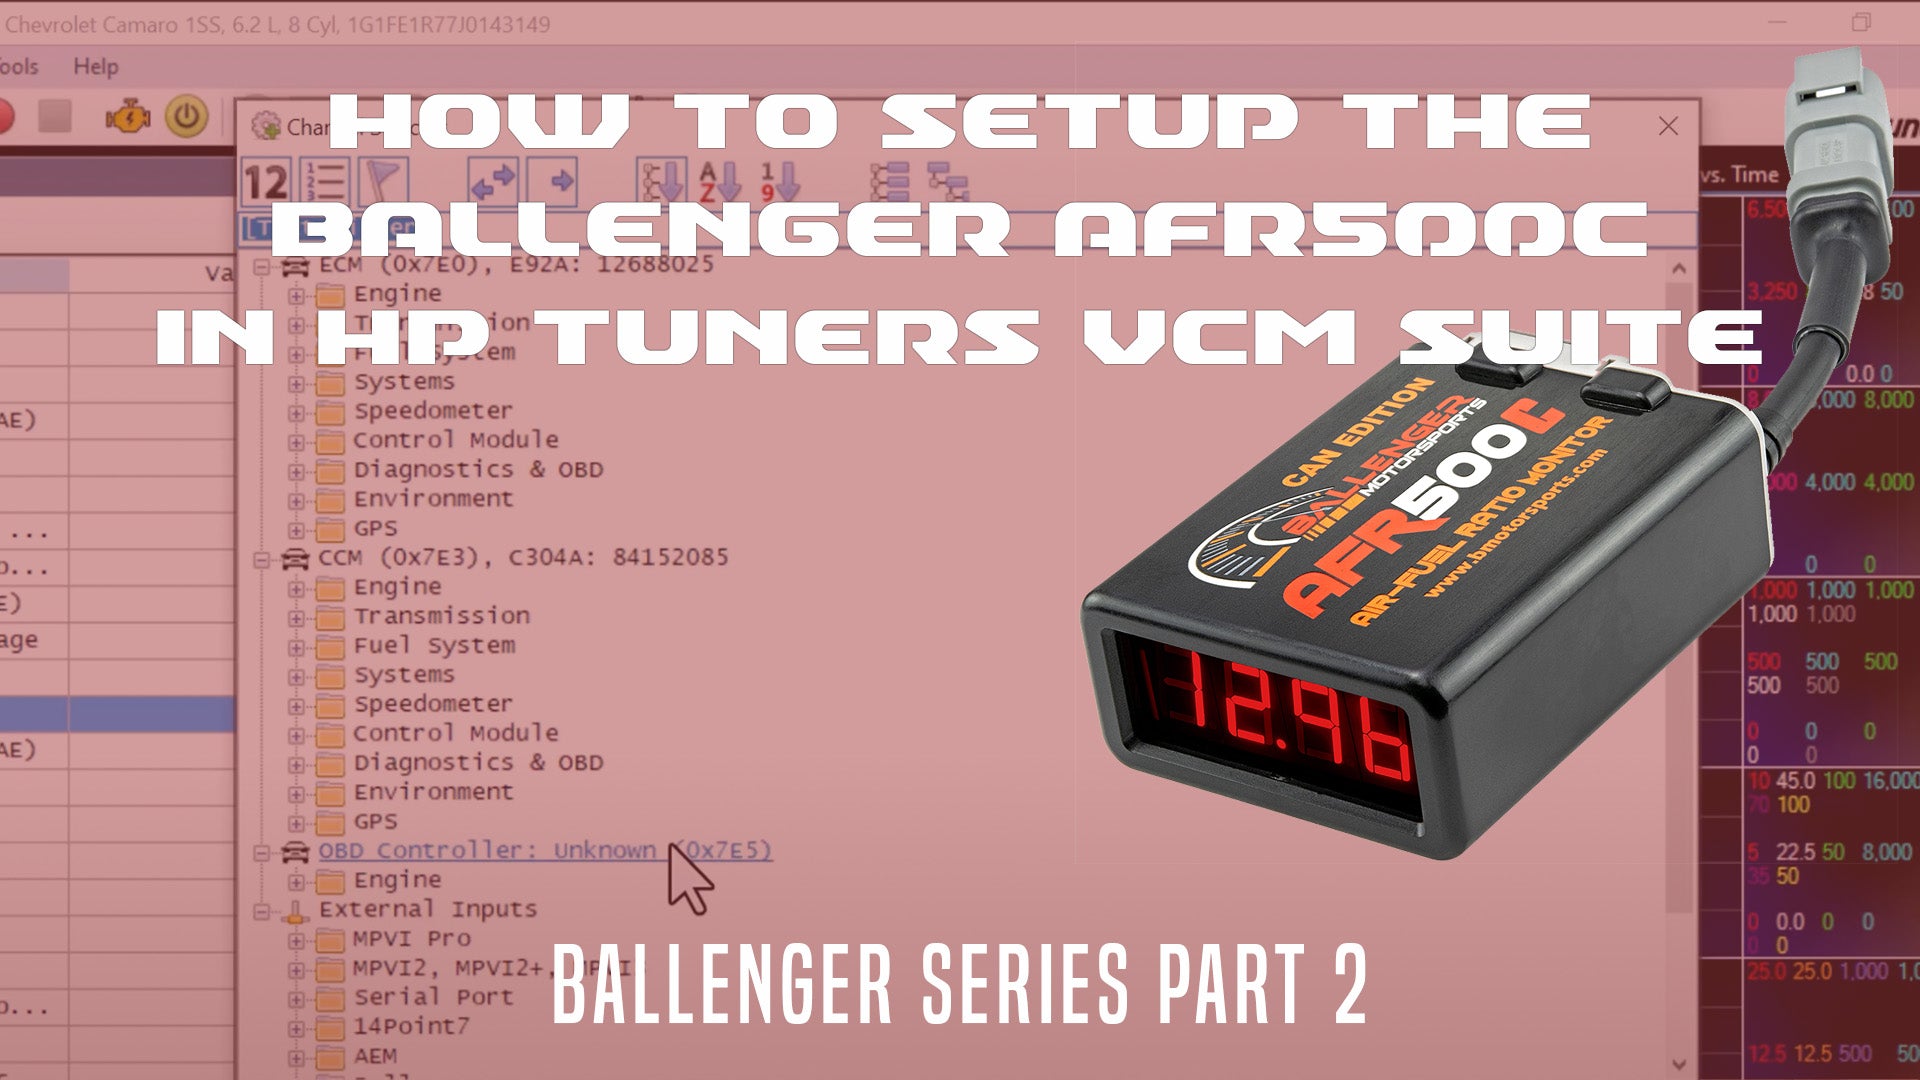 How to Setup Your Ballenger Wideband in HP Tuners VCM Scanner